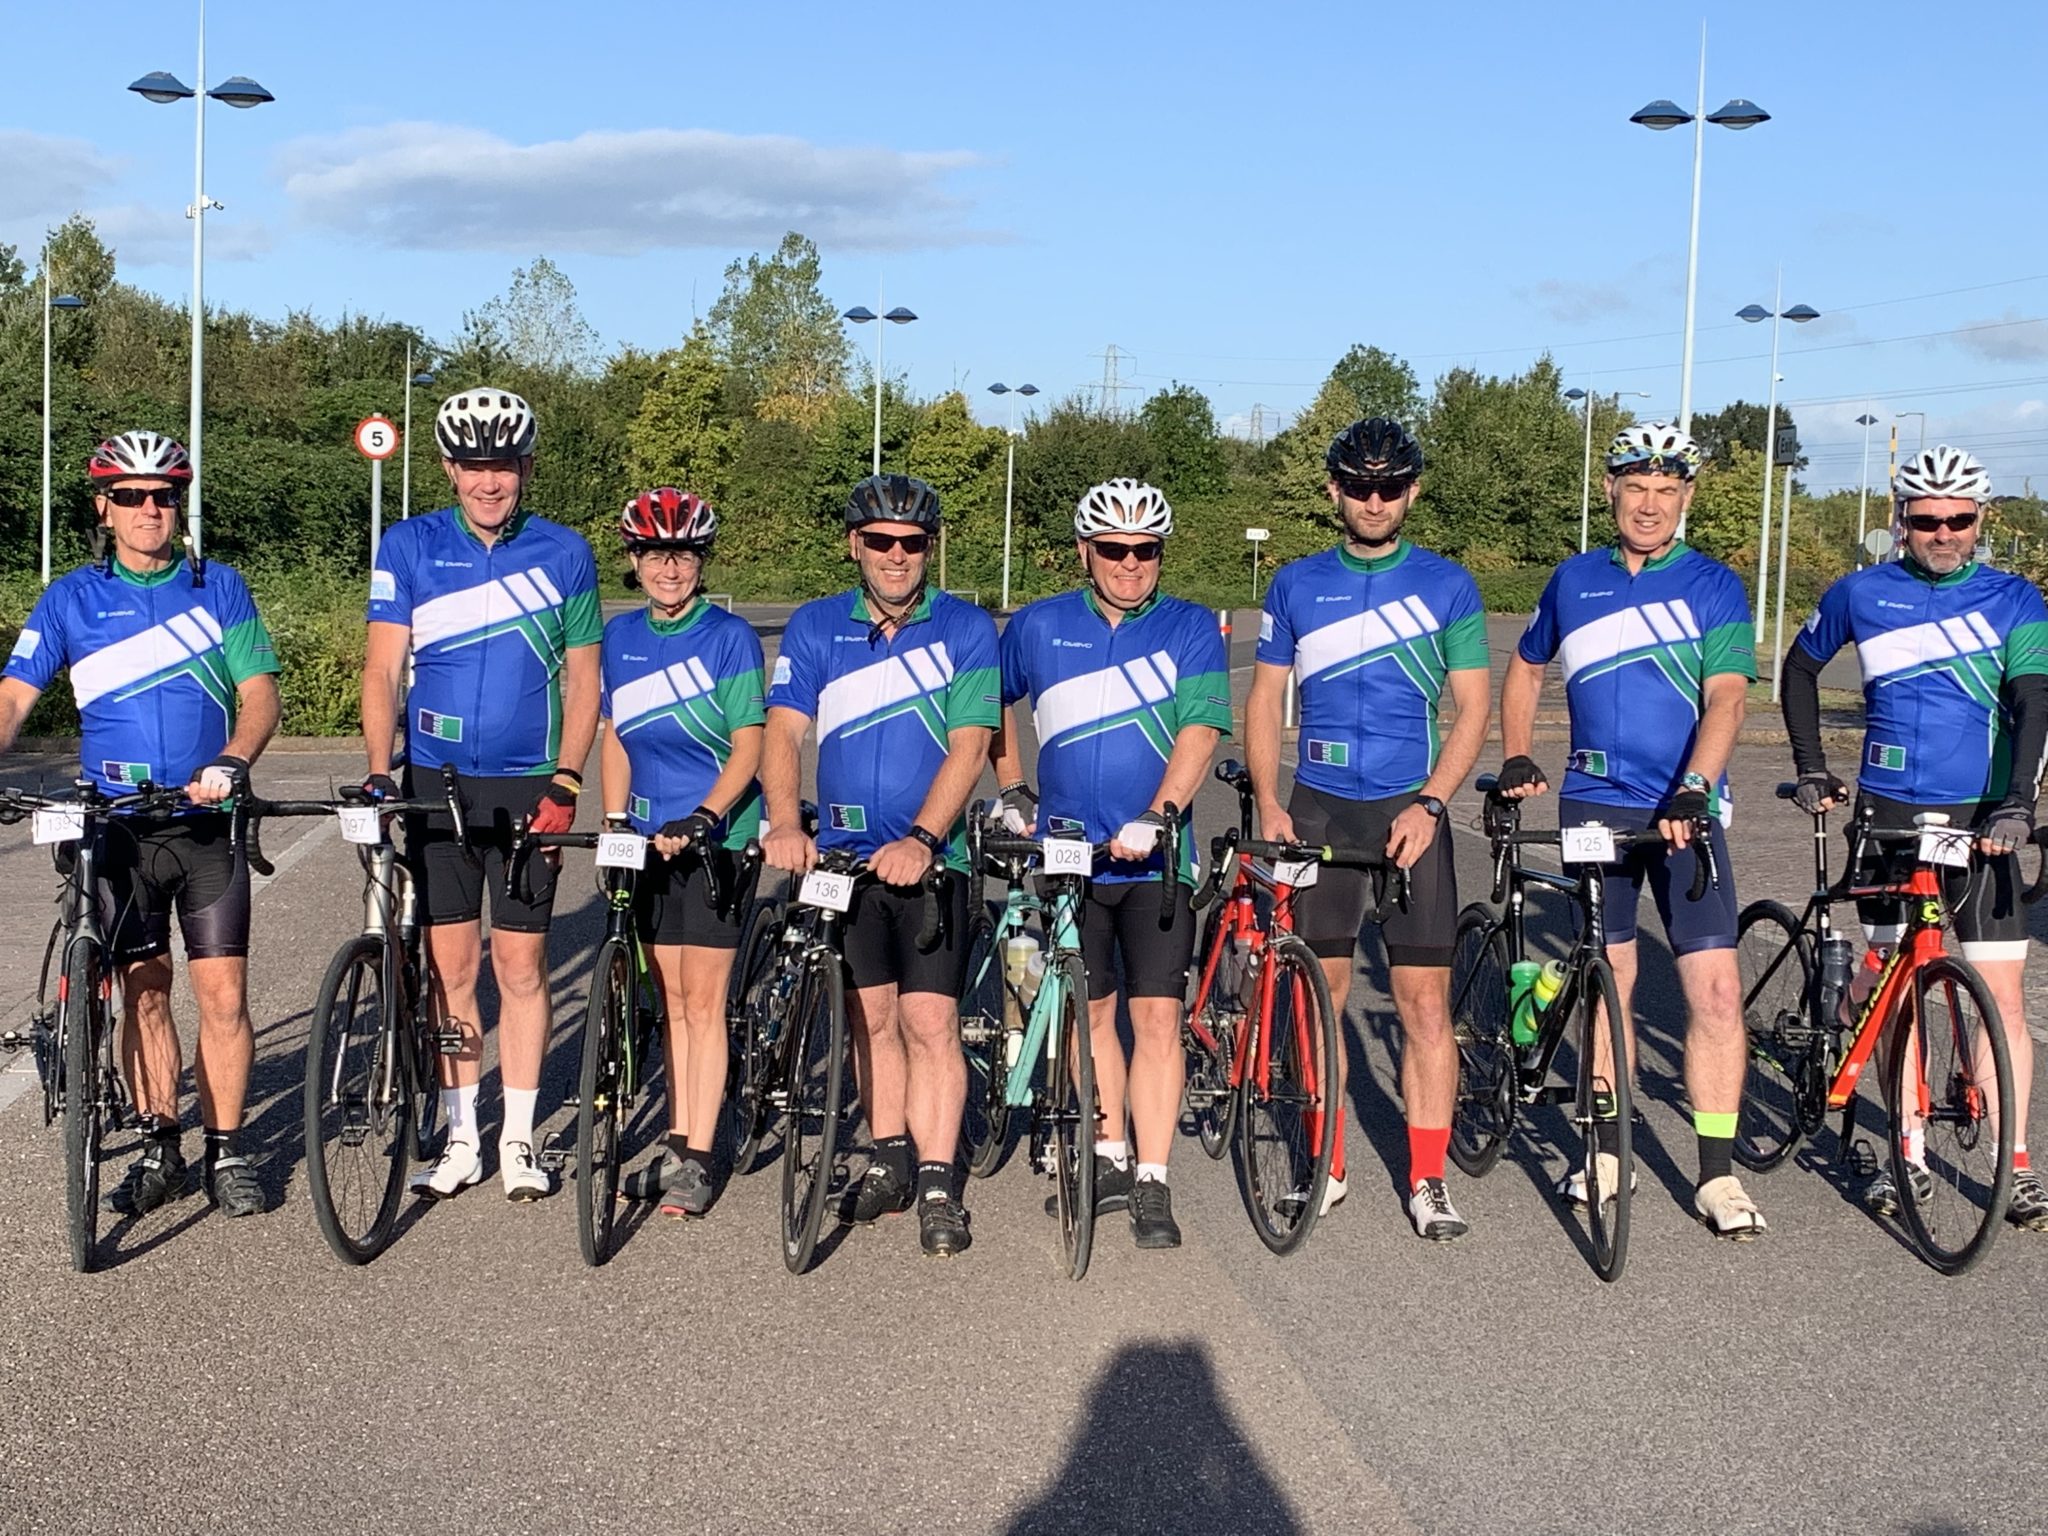 Summerfield cycle team hopes to raise £4000 for Prostate Cancer UK